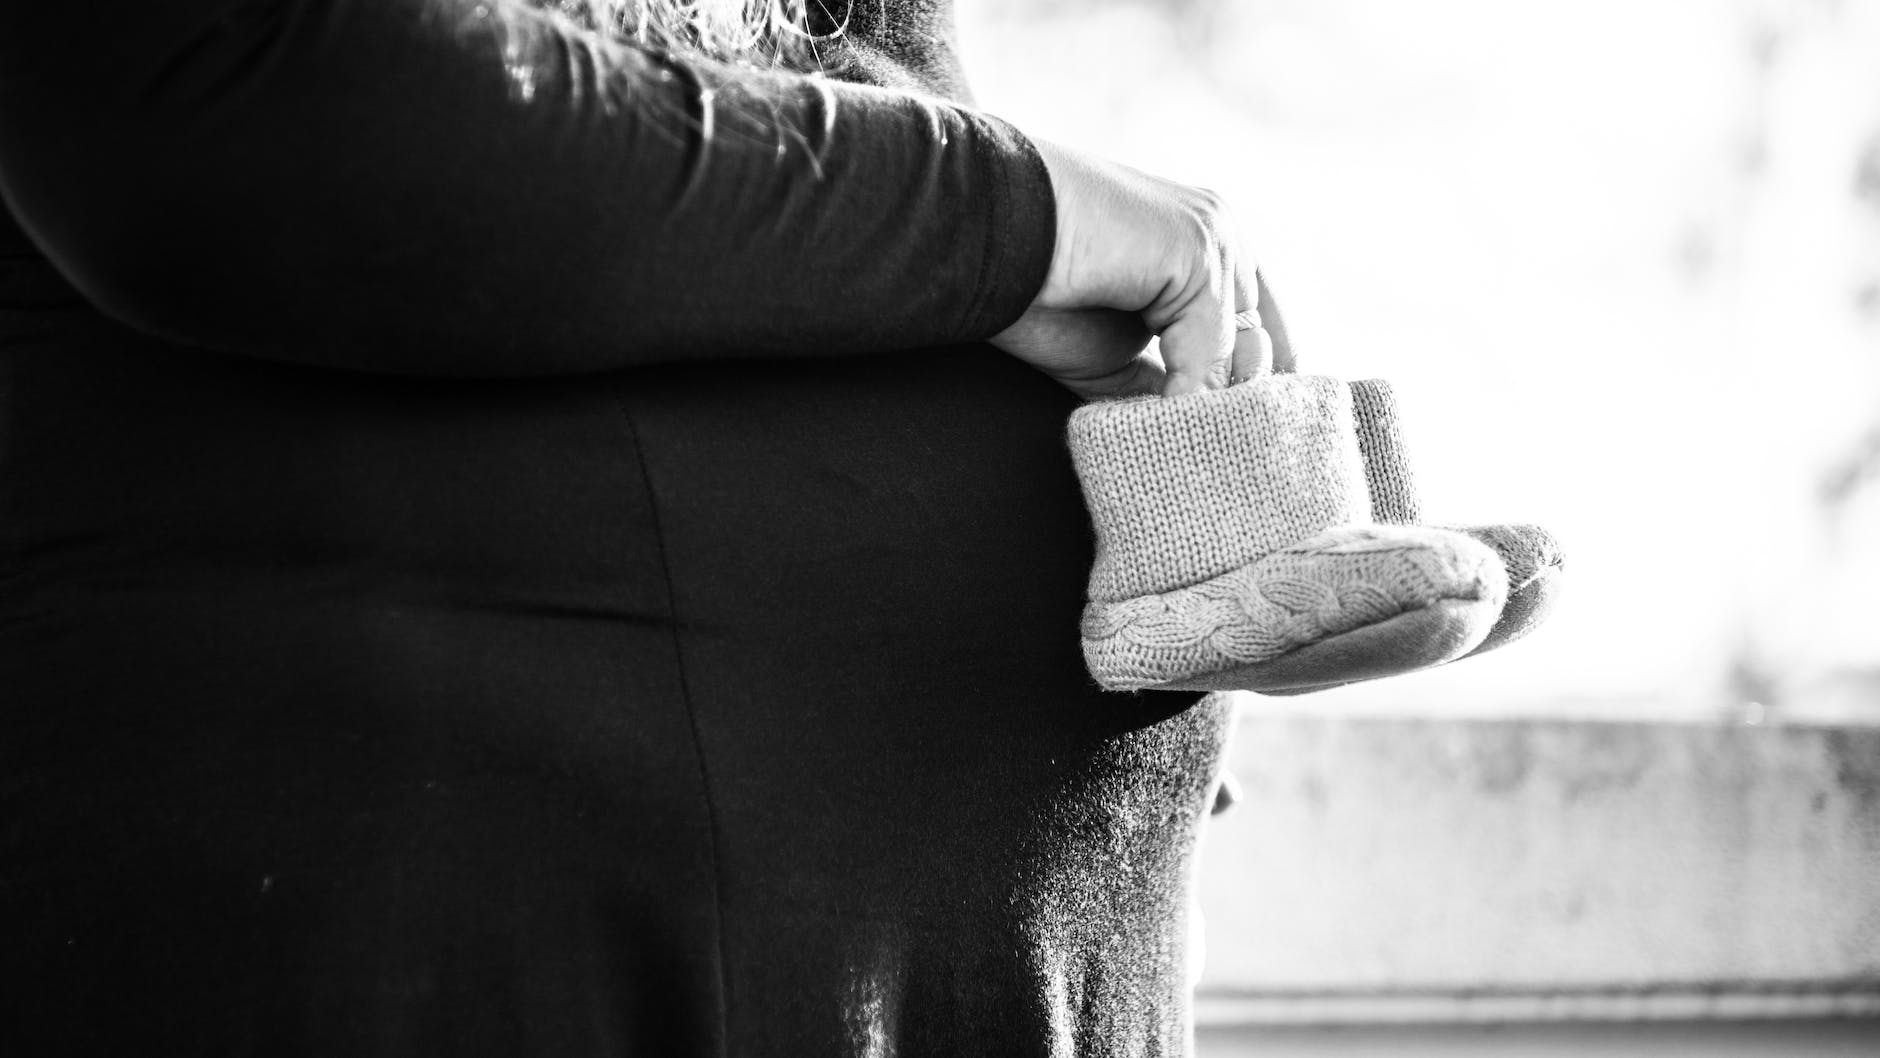 grayscale photo of person holding pair of toddler s shoes - Photo by Monika Balciuniene on Pexels.com